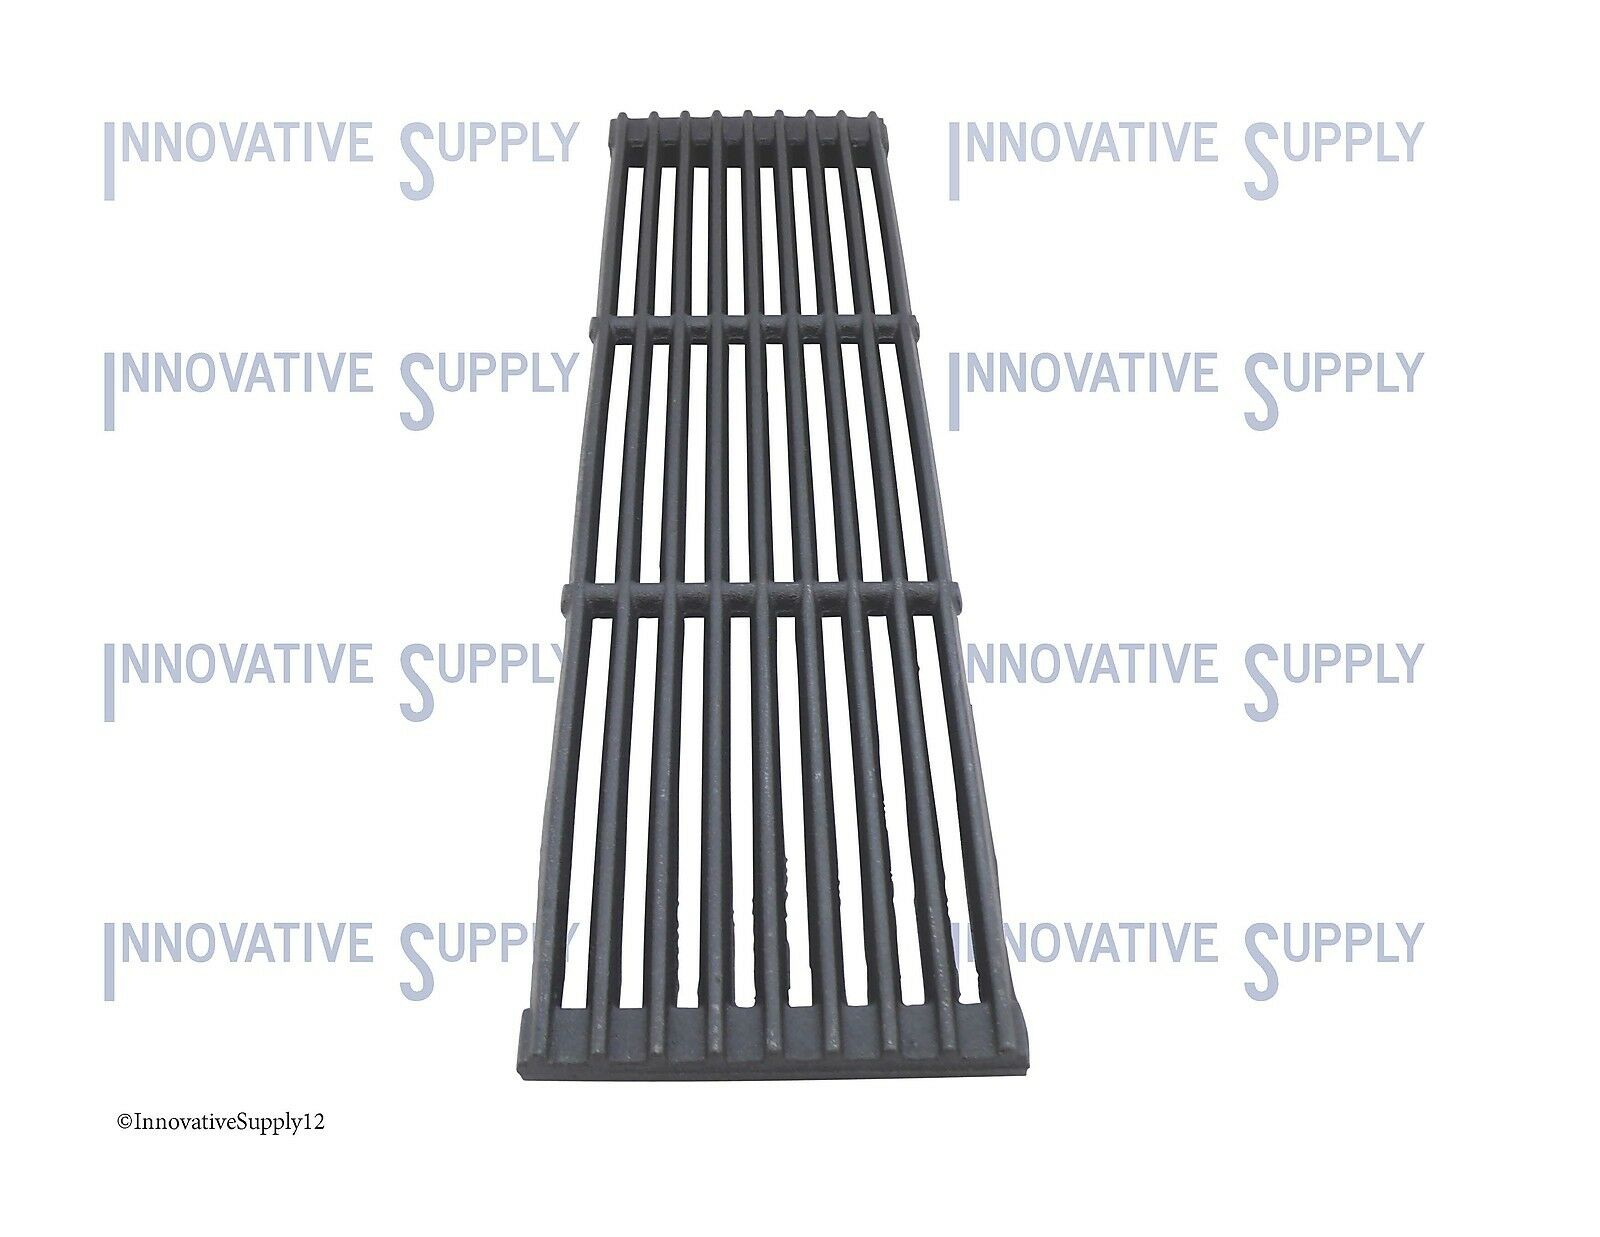 9-bar Grate - Cast Iron Top Grate - Char-broiler 5" X 21" Imperial Part No. 1206